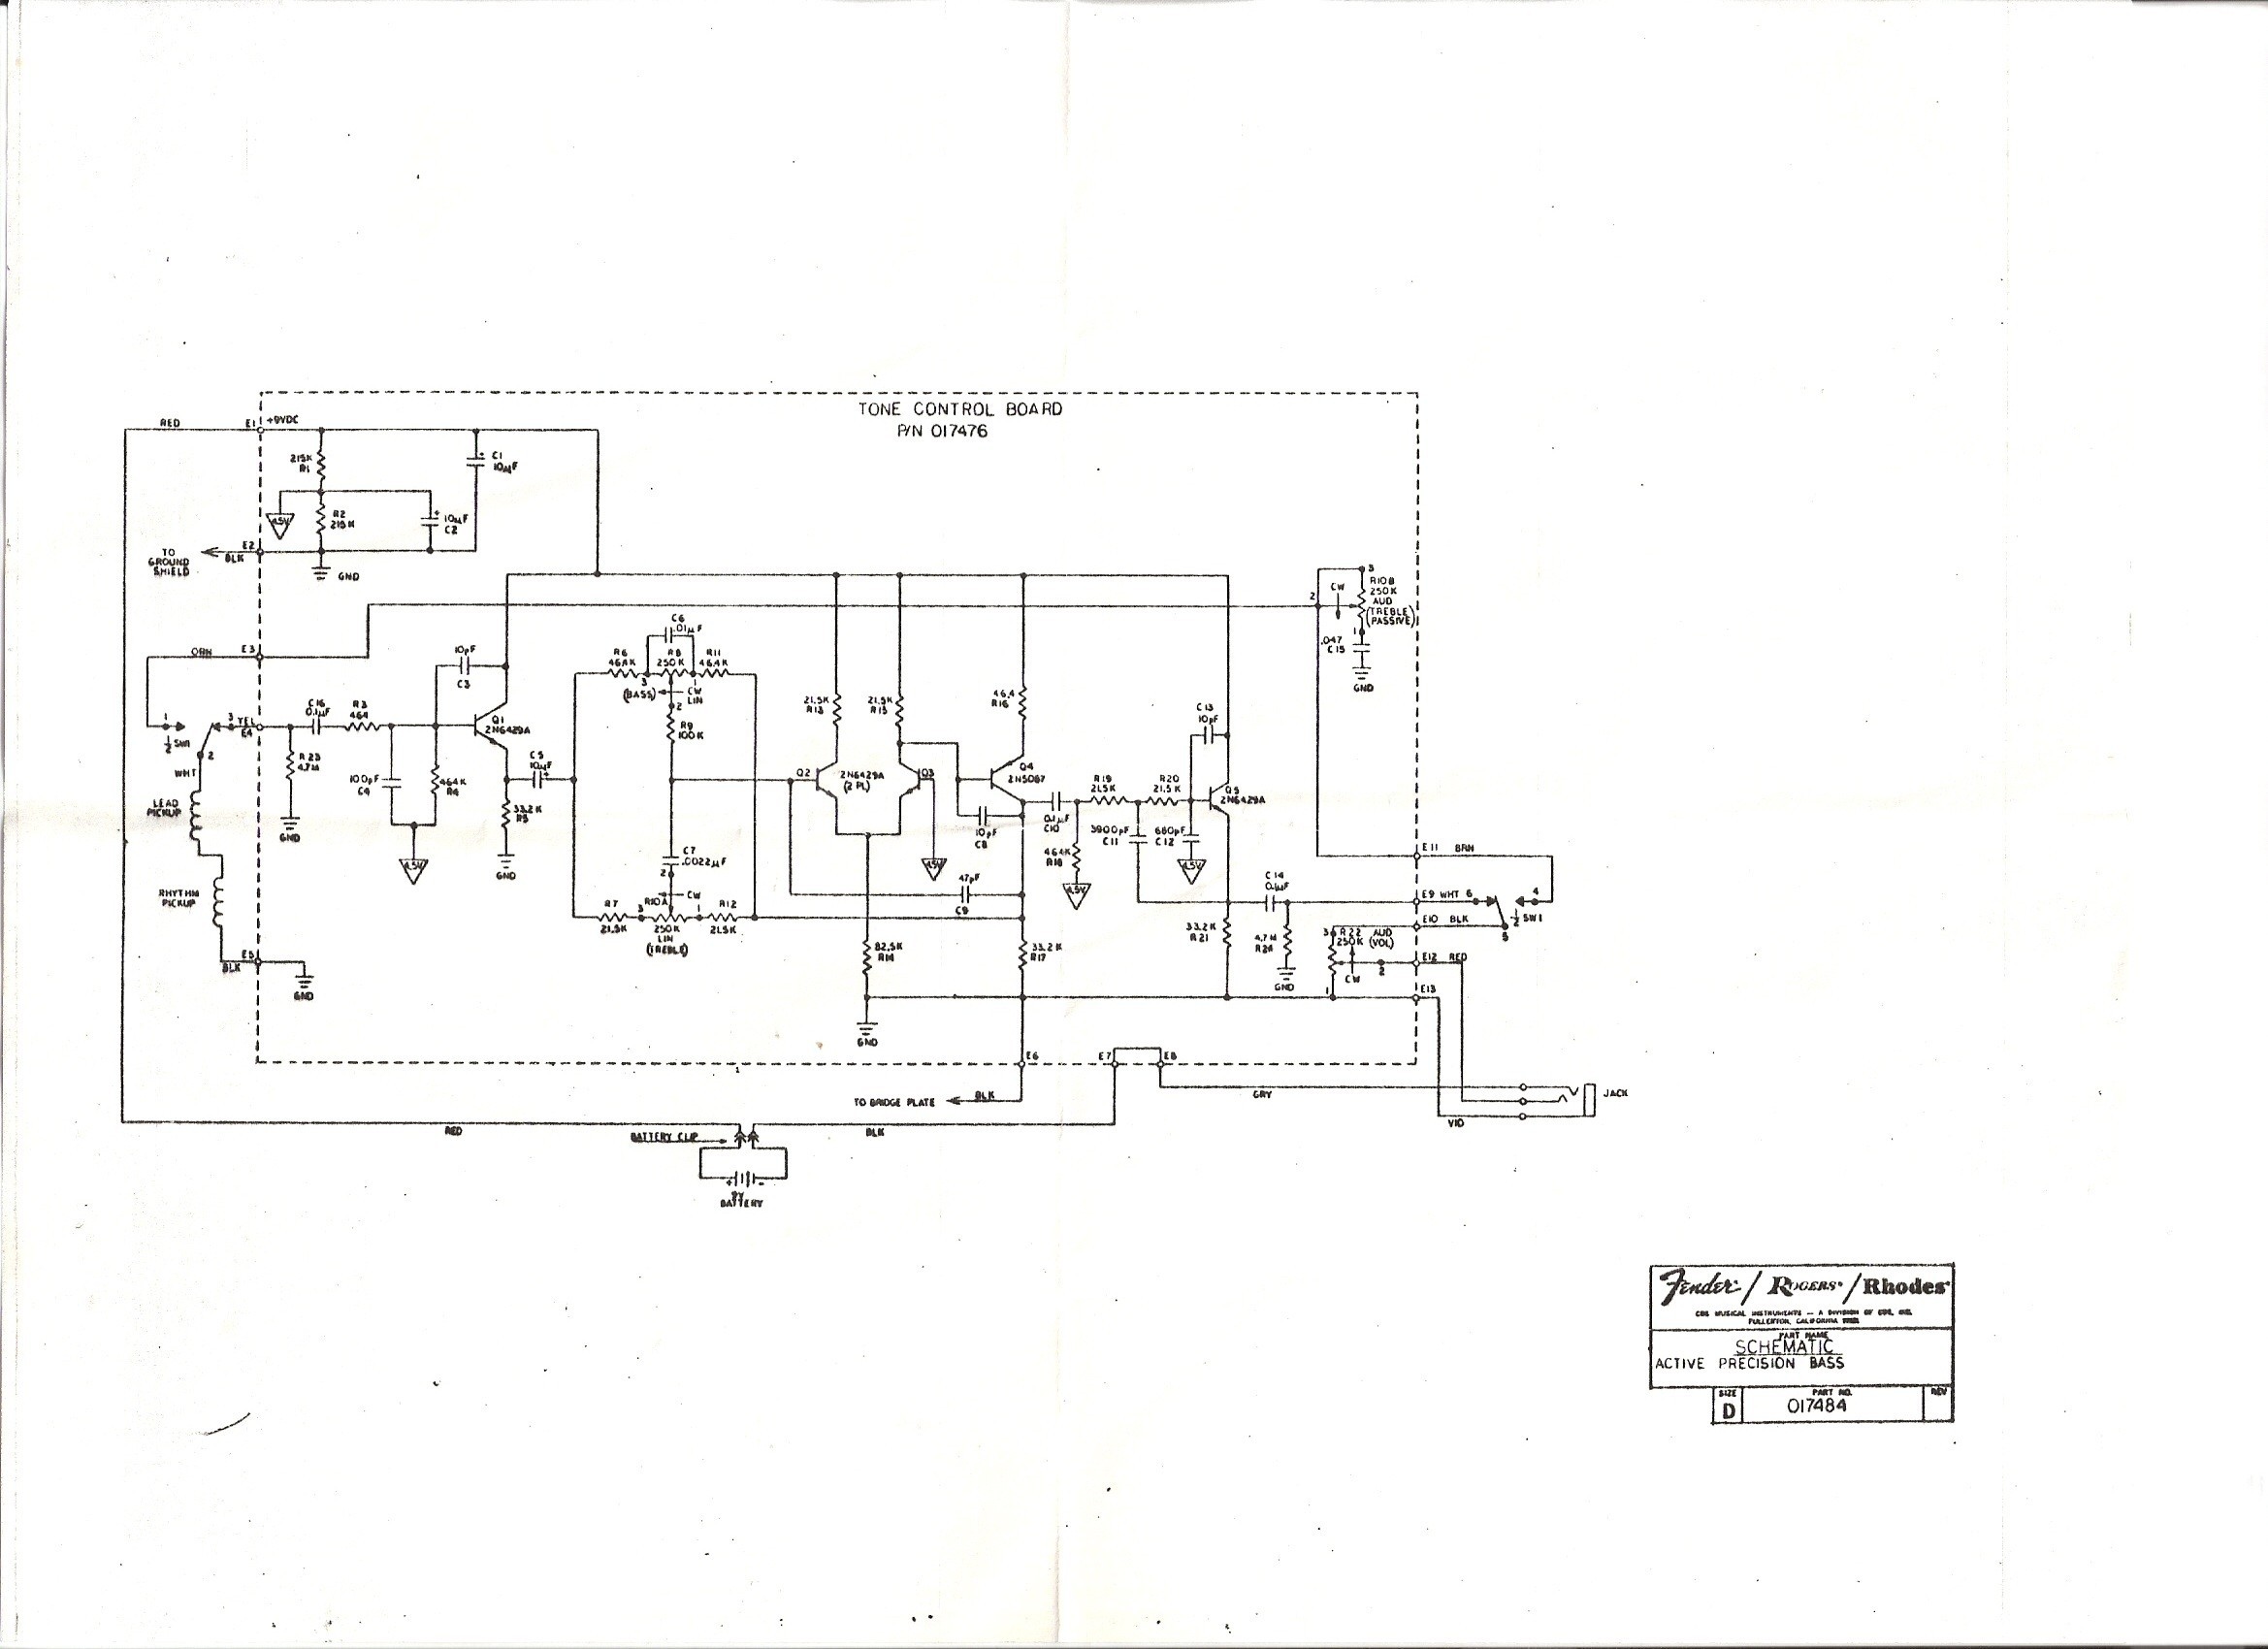 Wiring Diagram P Bass Fresh This Is An Addendum Page Containing Information Linked To From A